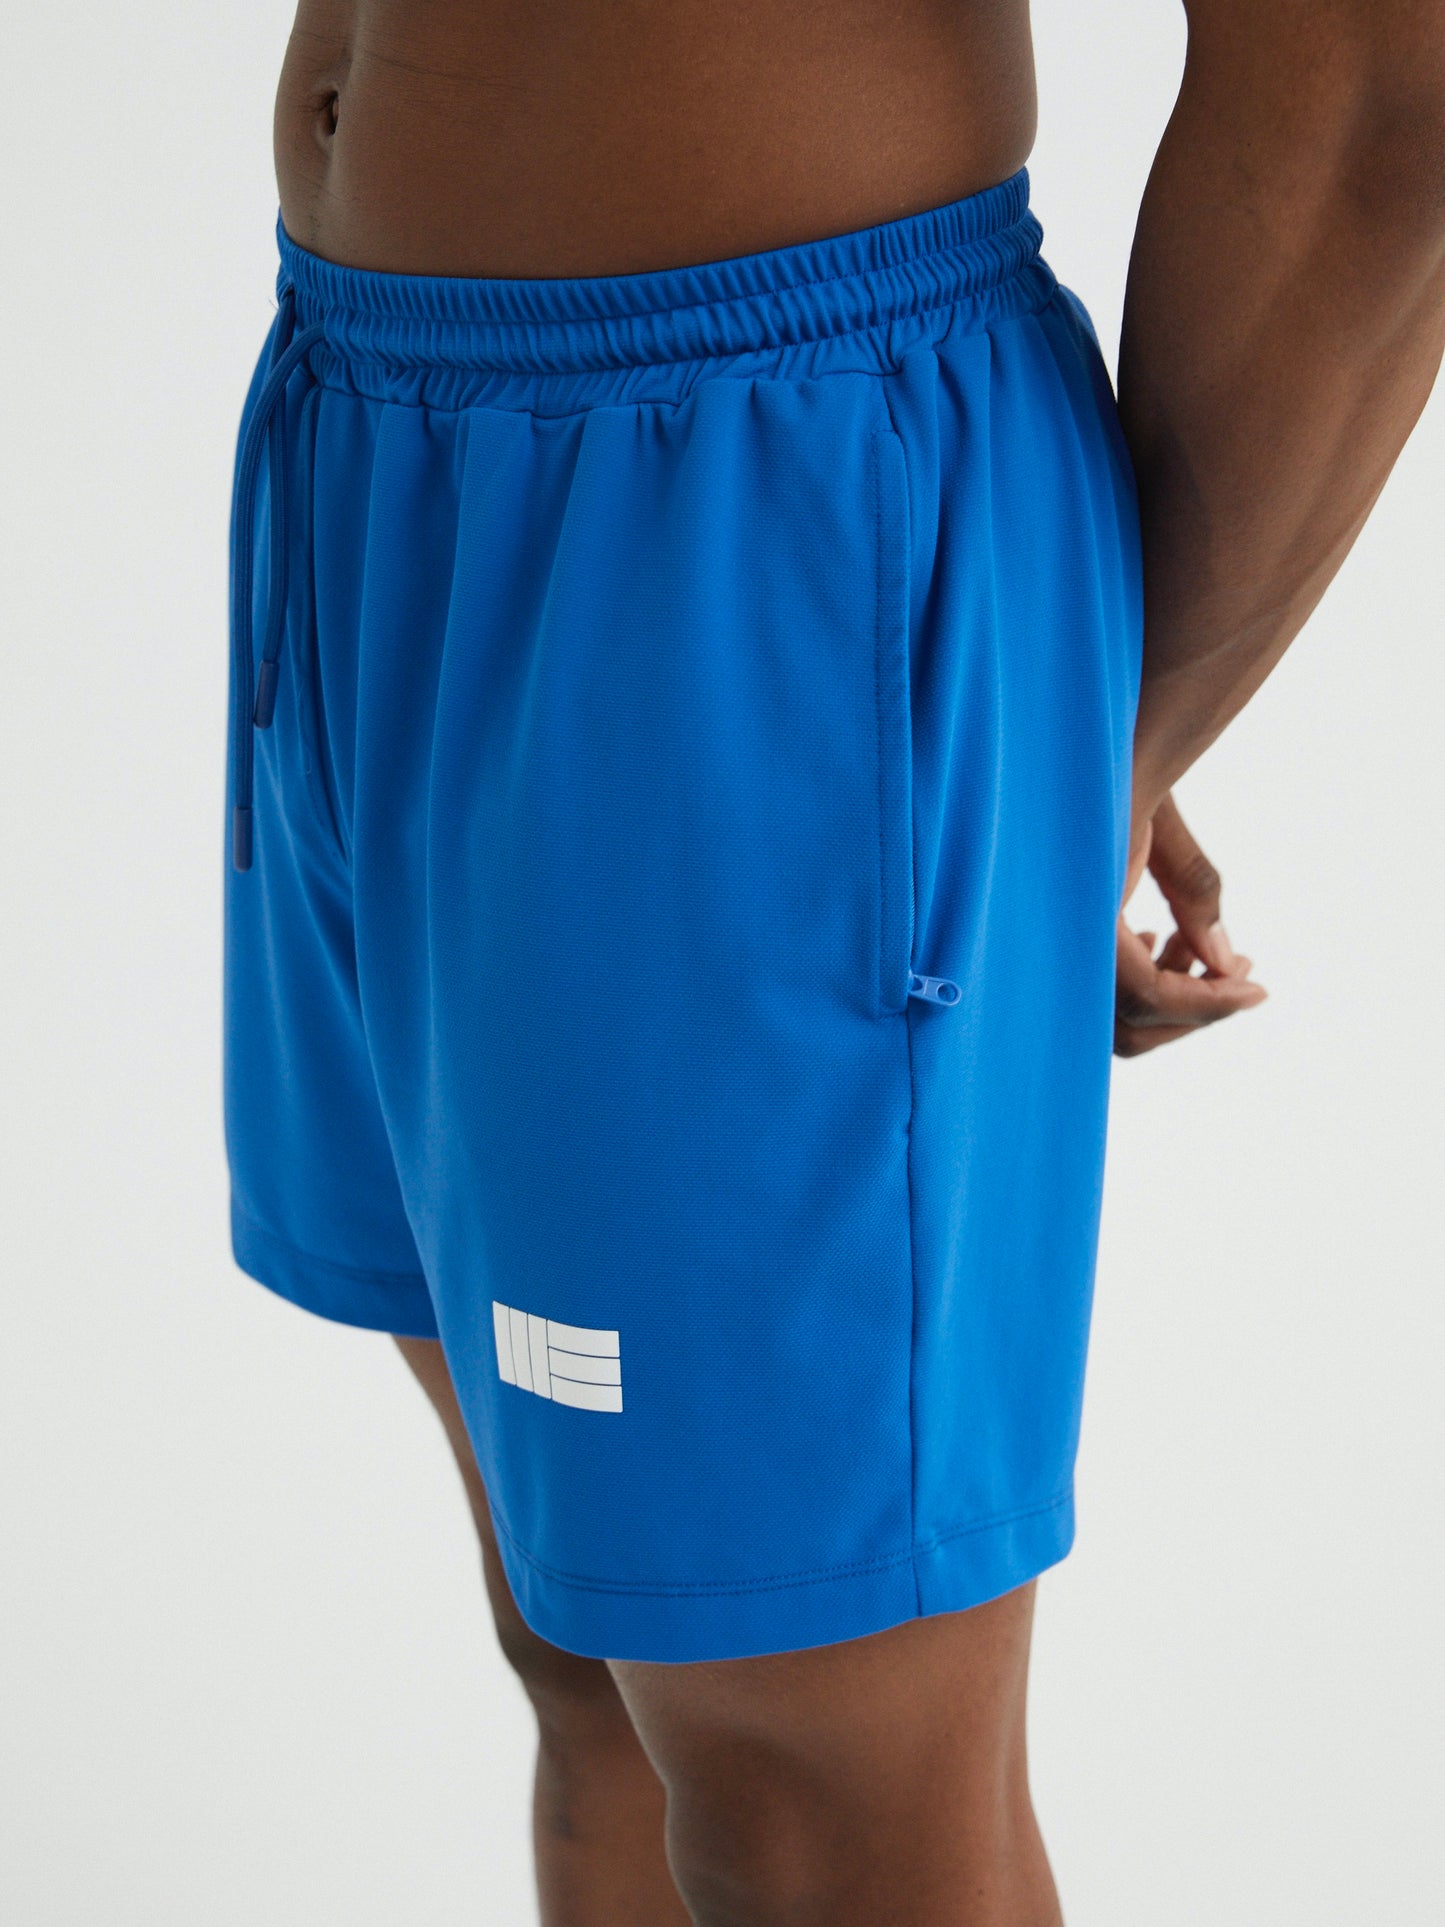 Mens Premium Athletic Sport Shorts Made in NYC - Blue